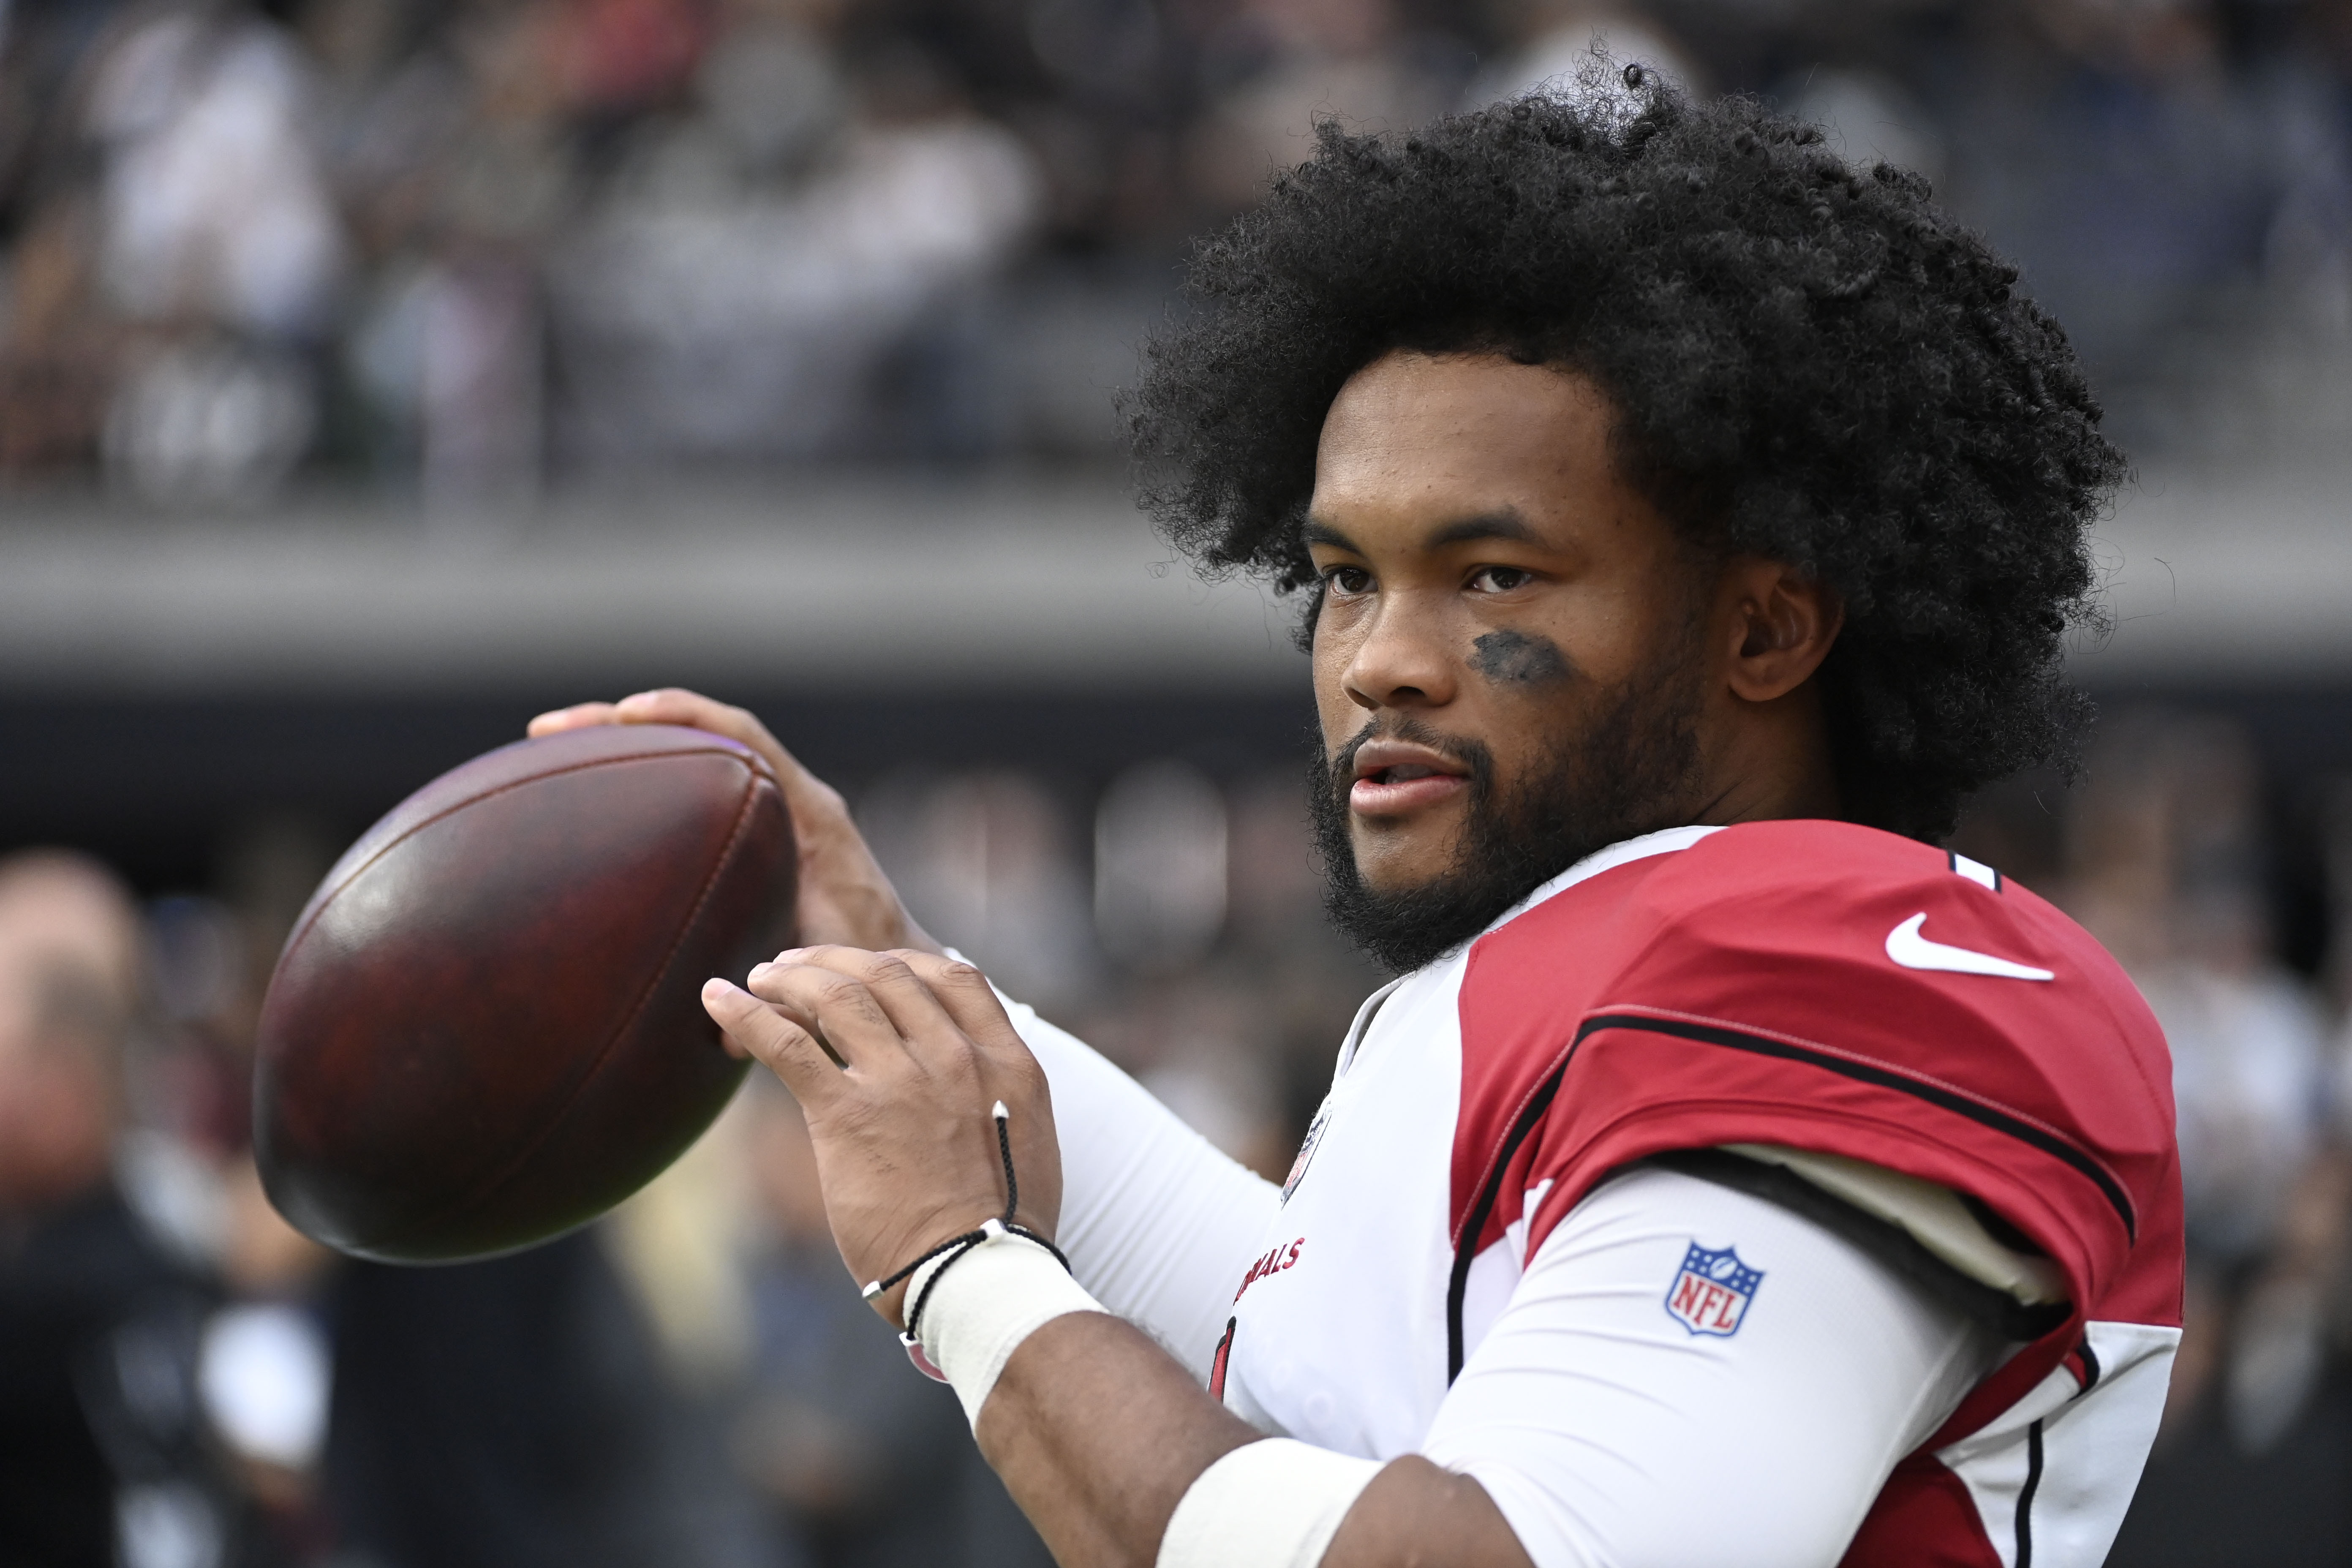 Kyler Murray The Football Player Makes His Pitch At D-Backs Game